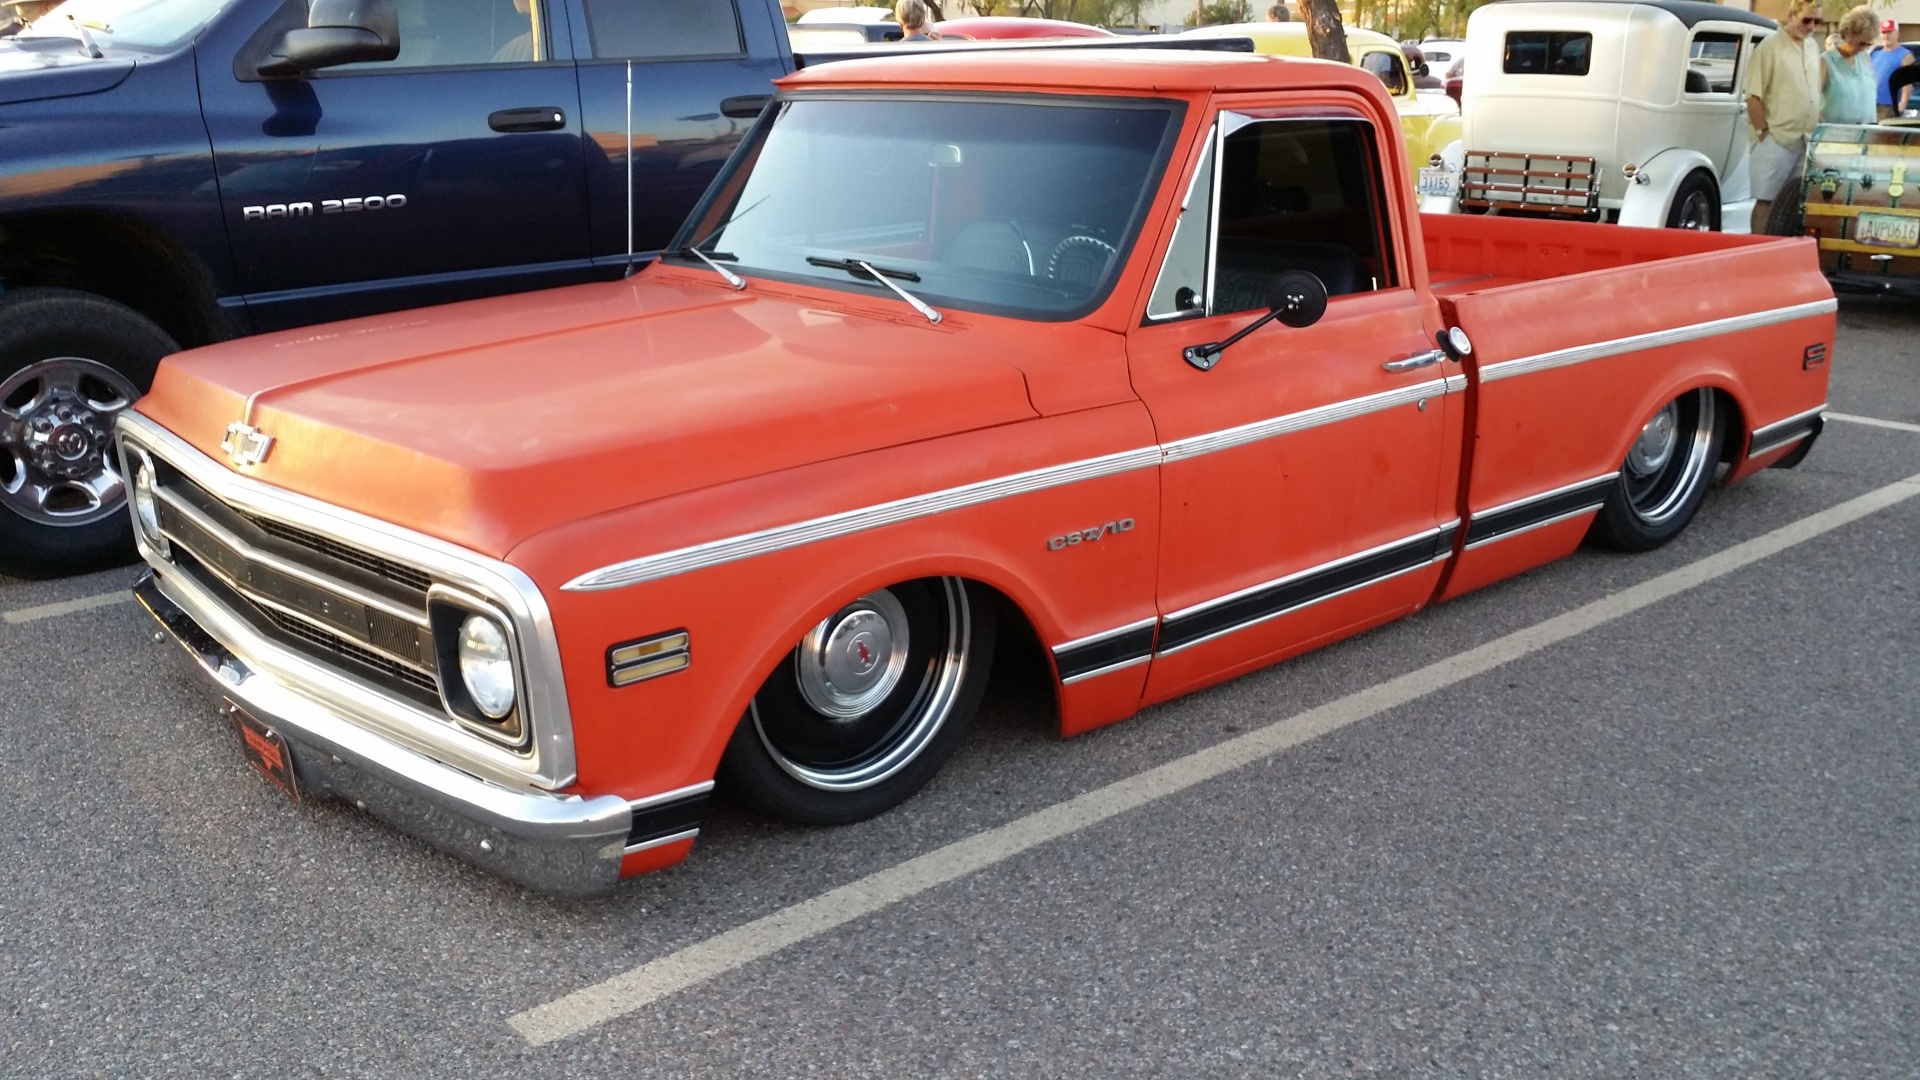 69 To 70 Chevy C10 Free Stock Photo - Public Domain Pictures